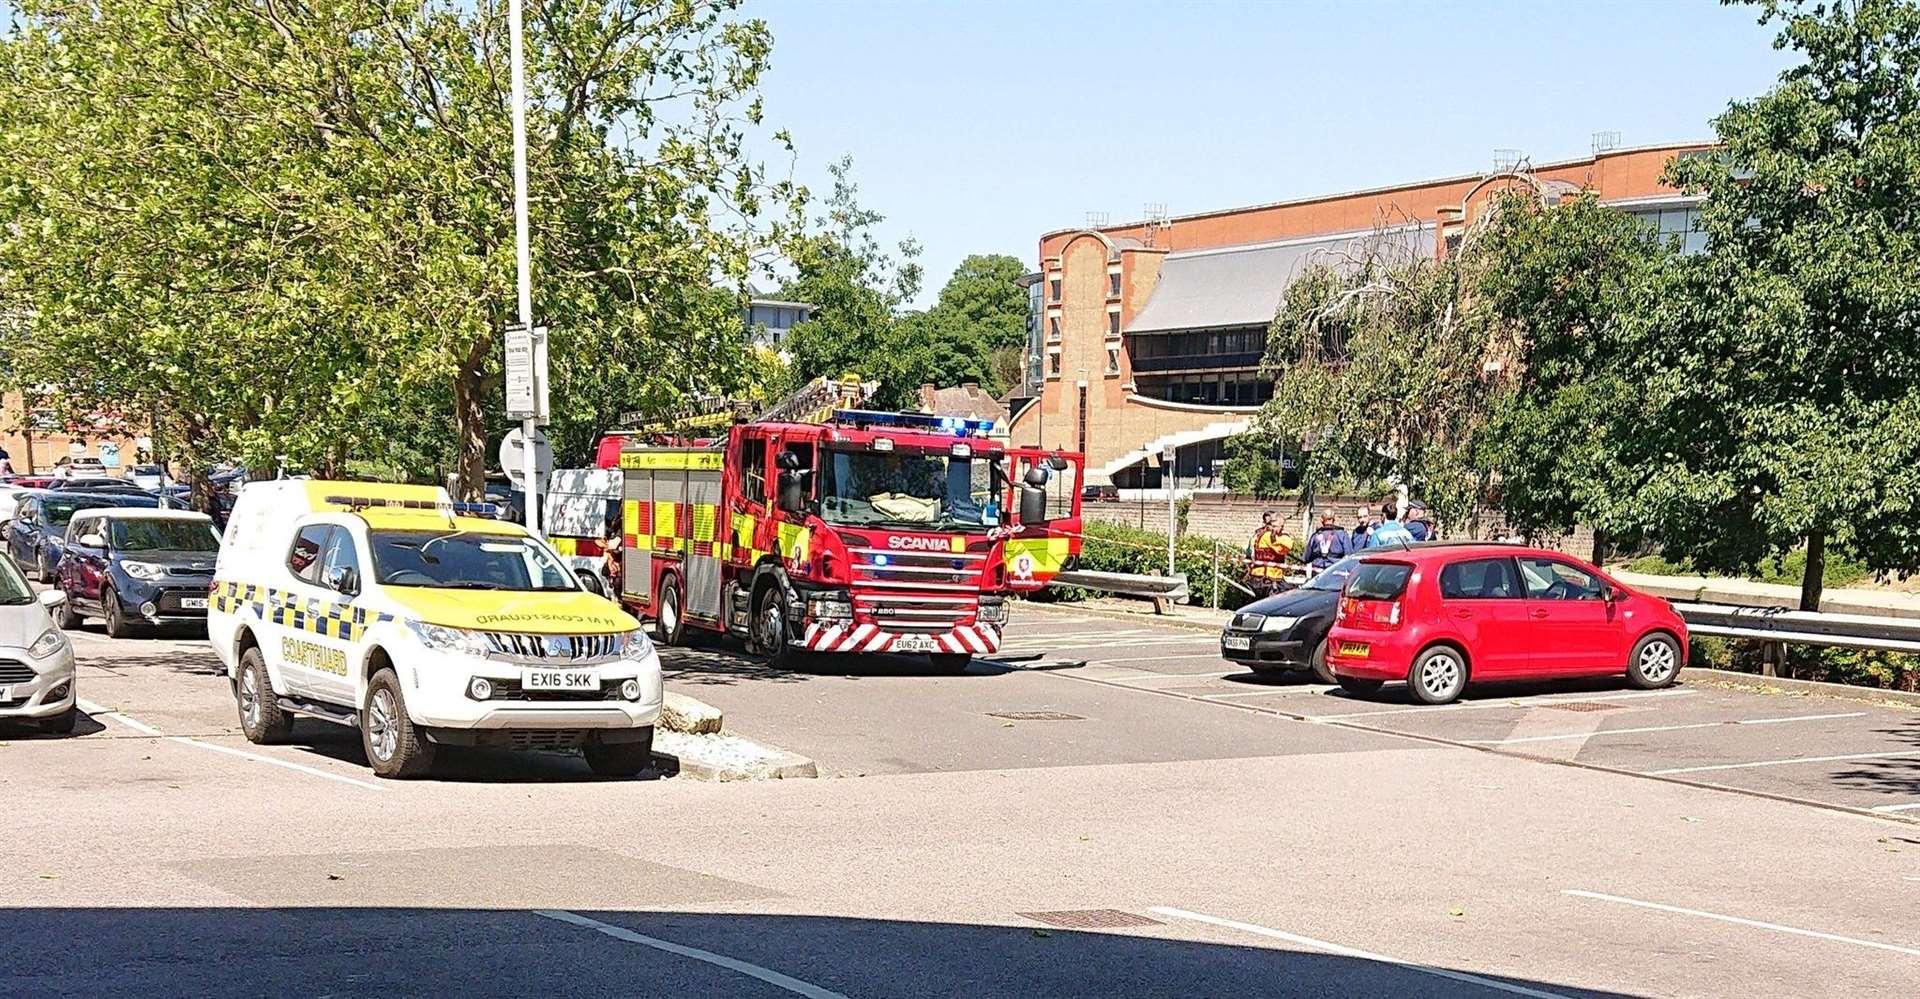 Emergency services were seen by the riverside in Maidstone town centre. Picture: @Jamous1973